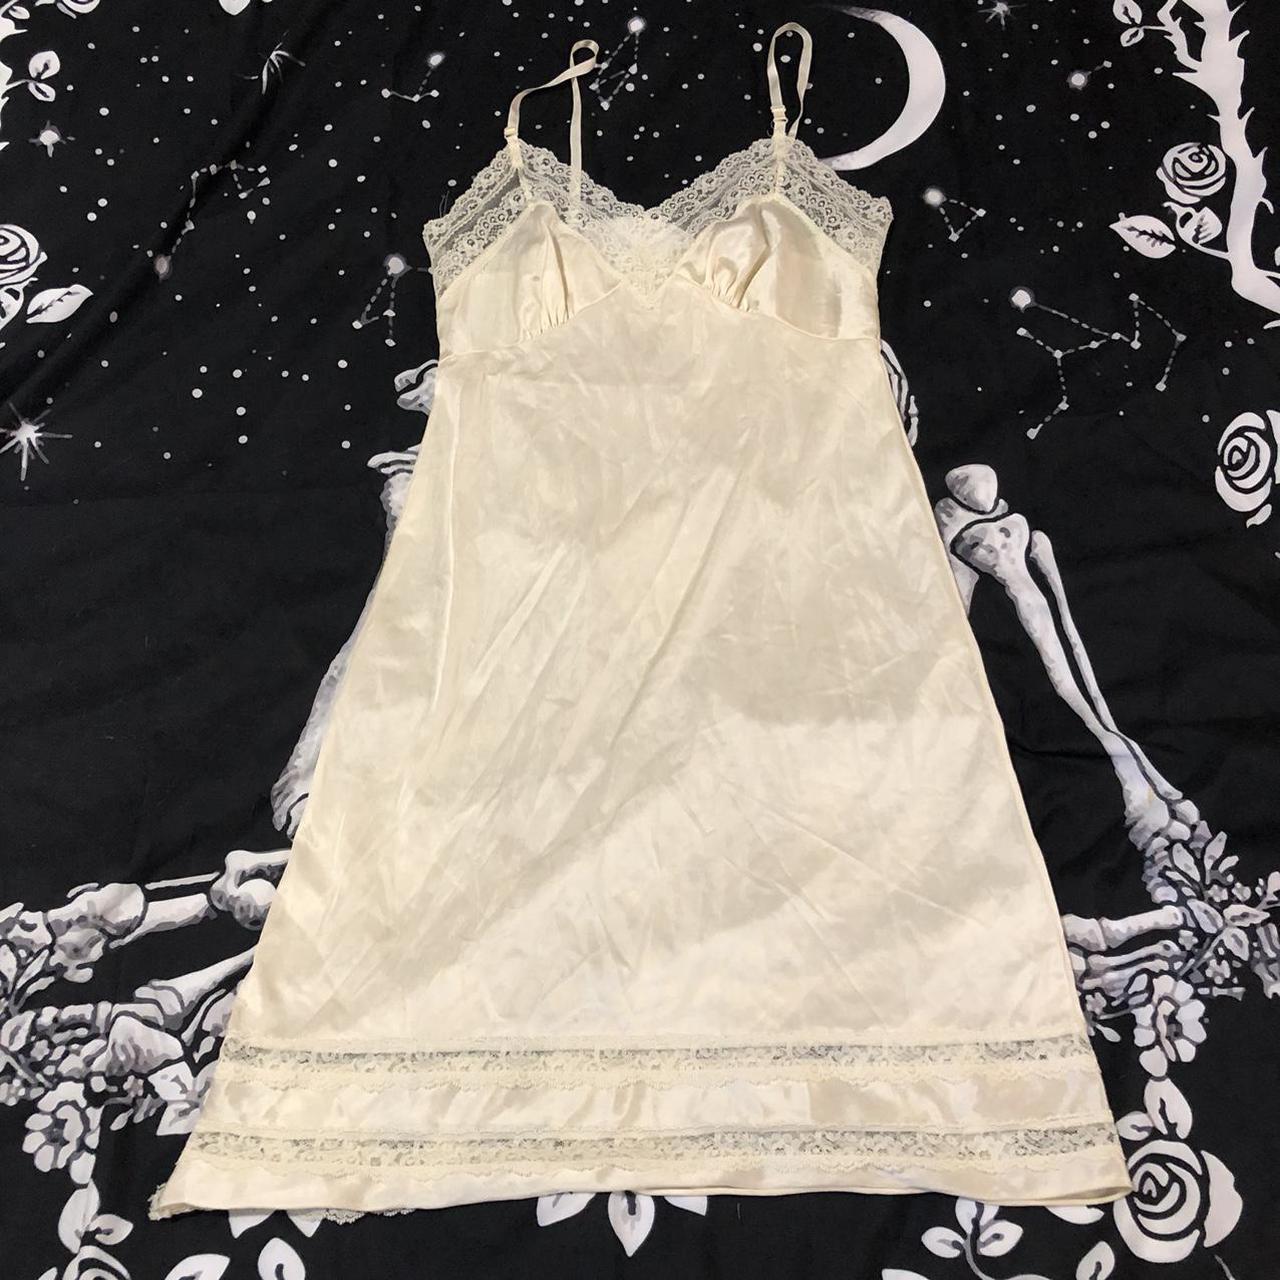 Product Image 1 - White slip dress lace nightgown